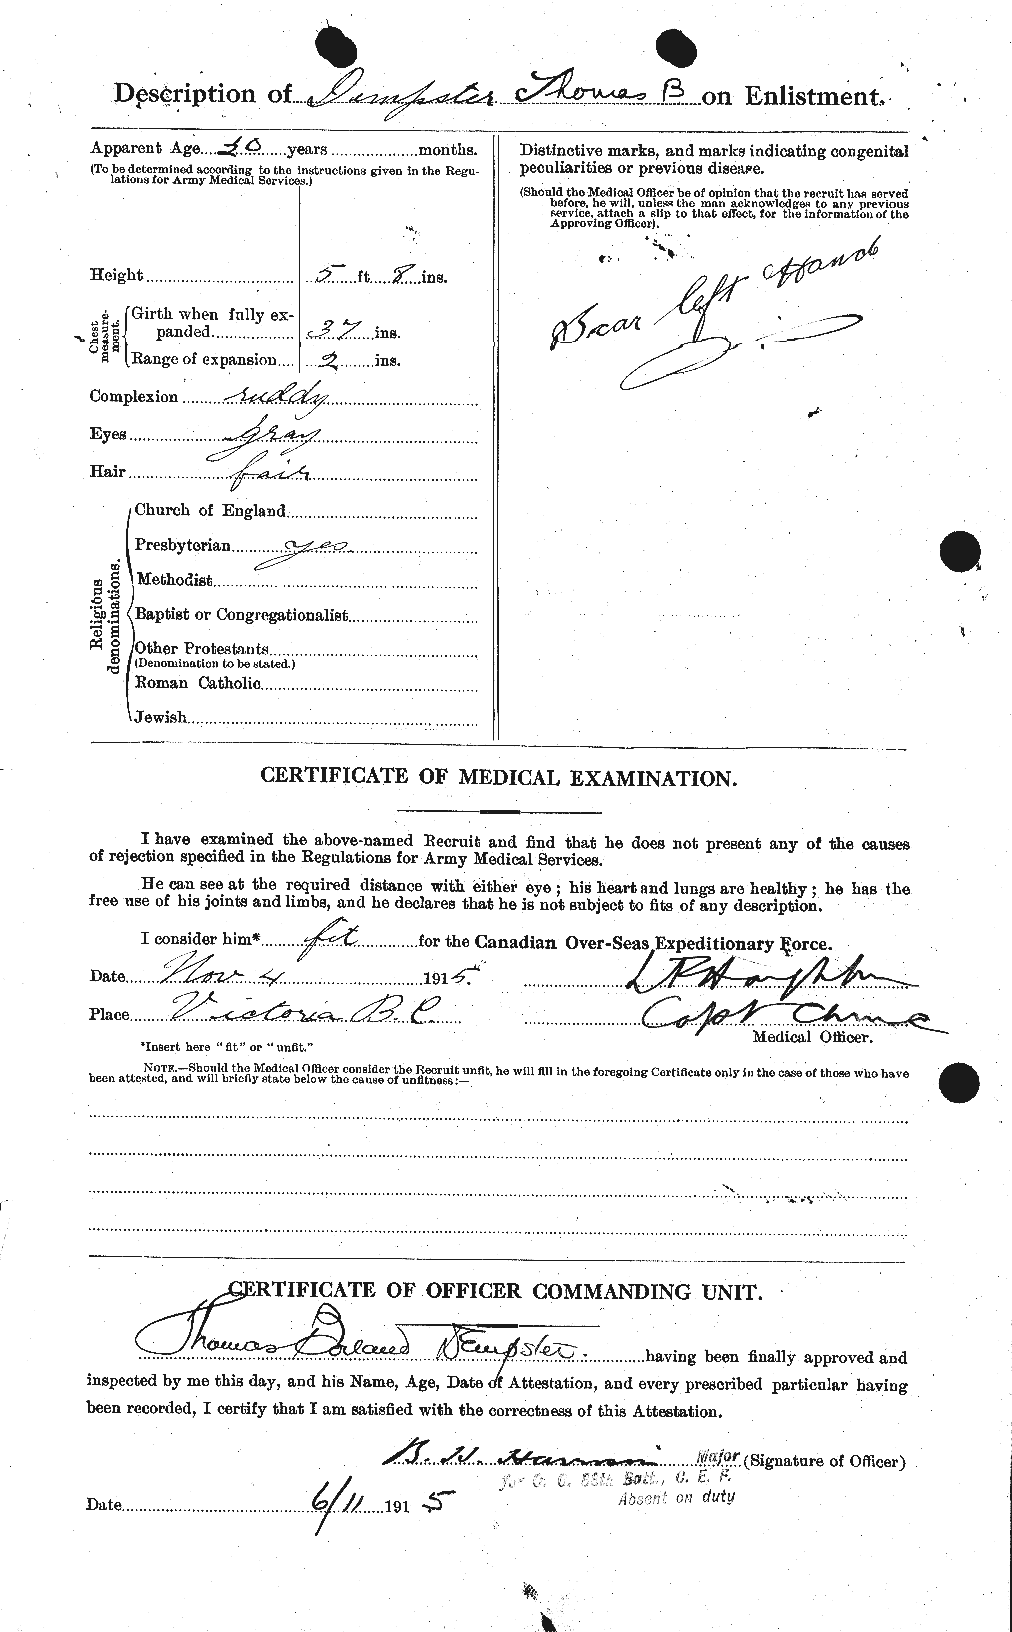 Personnel Records of the First World War - CEF 286977b